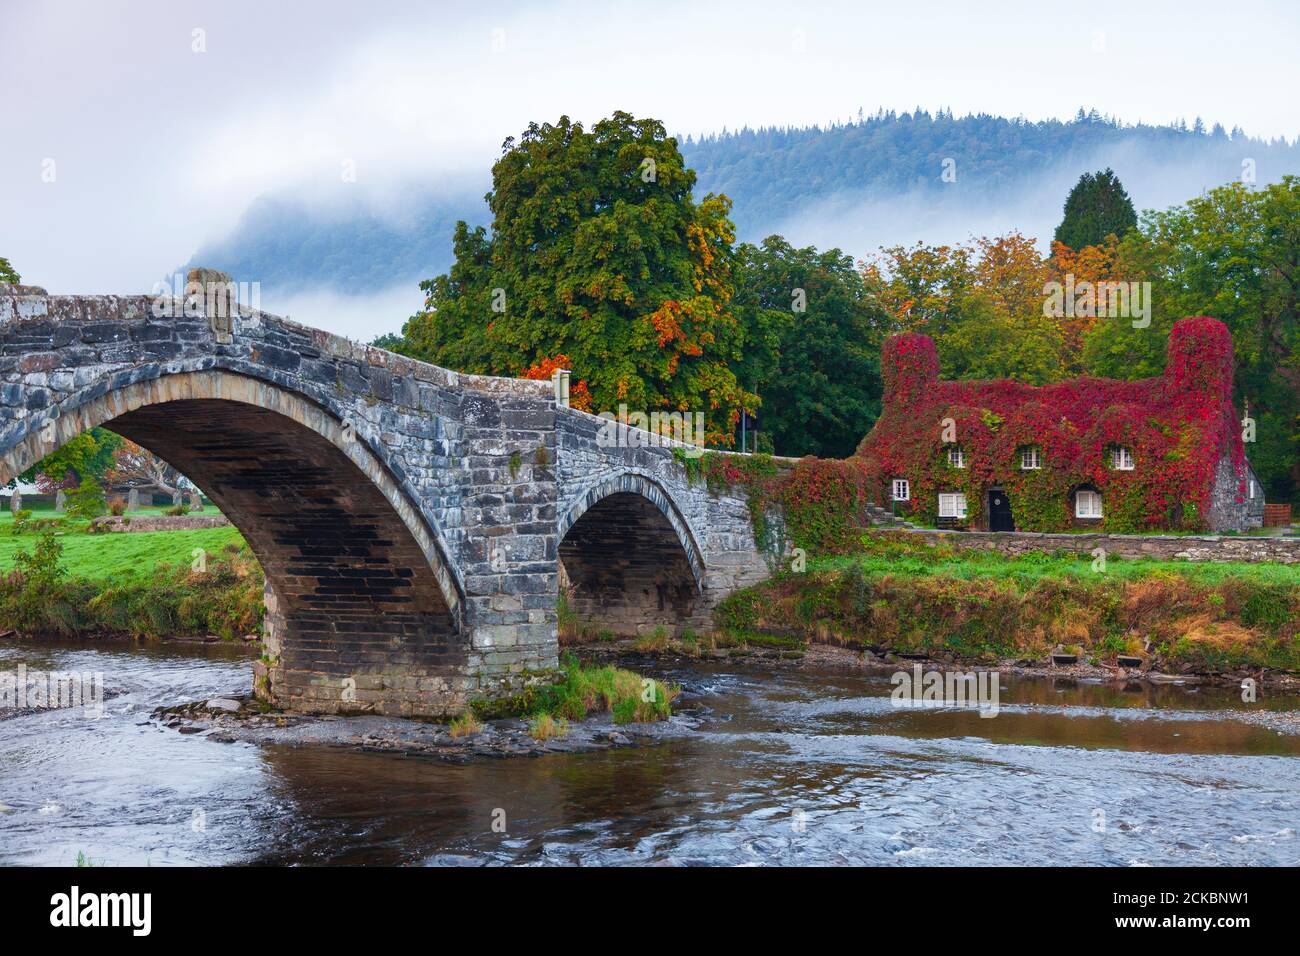 Llanrwst, North Wales, UK. UK Weather: 16th September 2020, with the start of Autumn next week already the yearly spectacle of the Virgina Ivy turning deep red has begun on the Tu Hwnt I’r Bont tea room on the banks of the Conwy River in Llanrwst. A popular attraction at this time of the year as the Virginia Ivy turns from lush green to deep reds and purples as Autumn and cooler temperatures take hold.  © DGDImages/AlamyNews Stock Photo